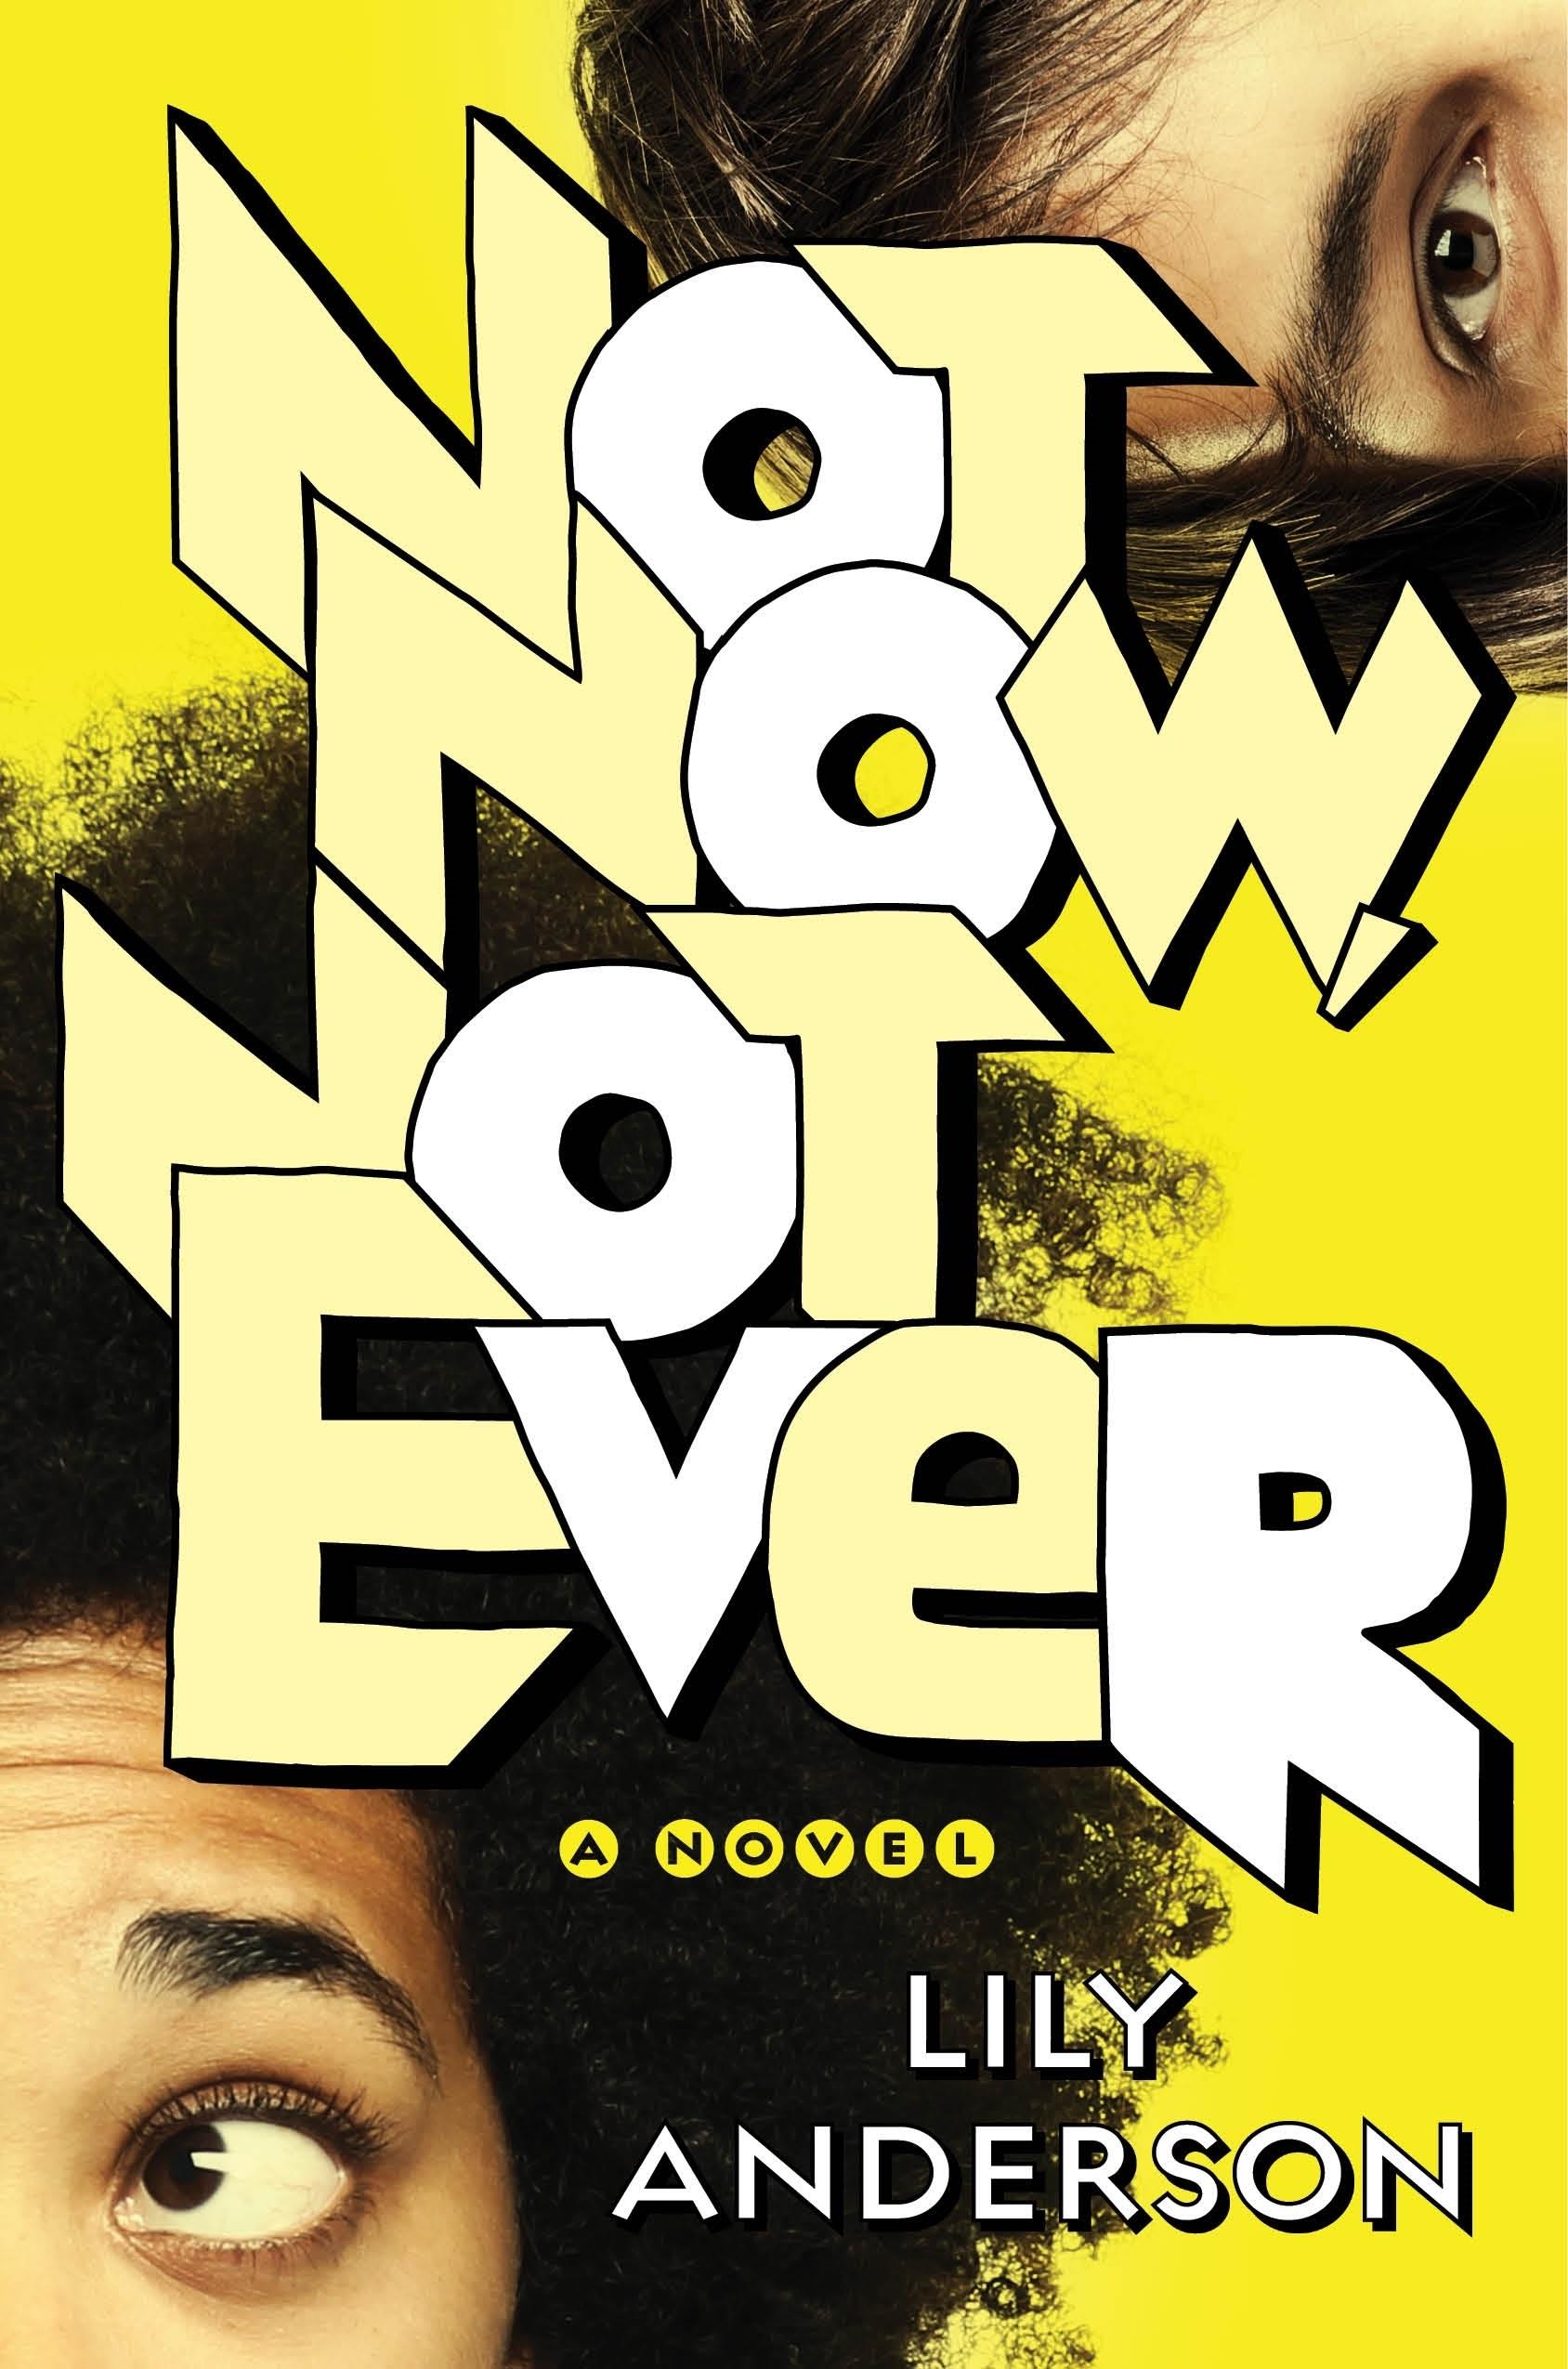 Blog Tour: Excerpt of Not Now, Not Ever by Lily Anderson